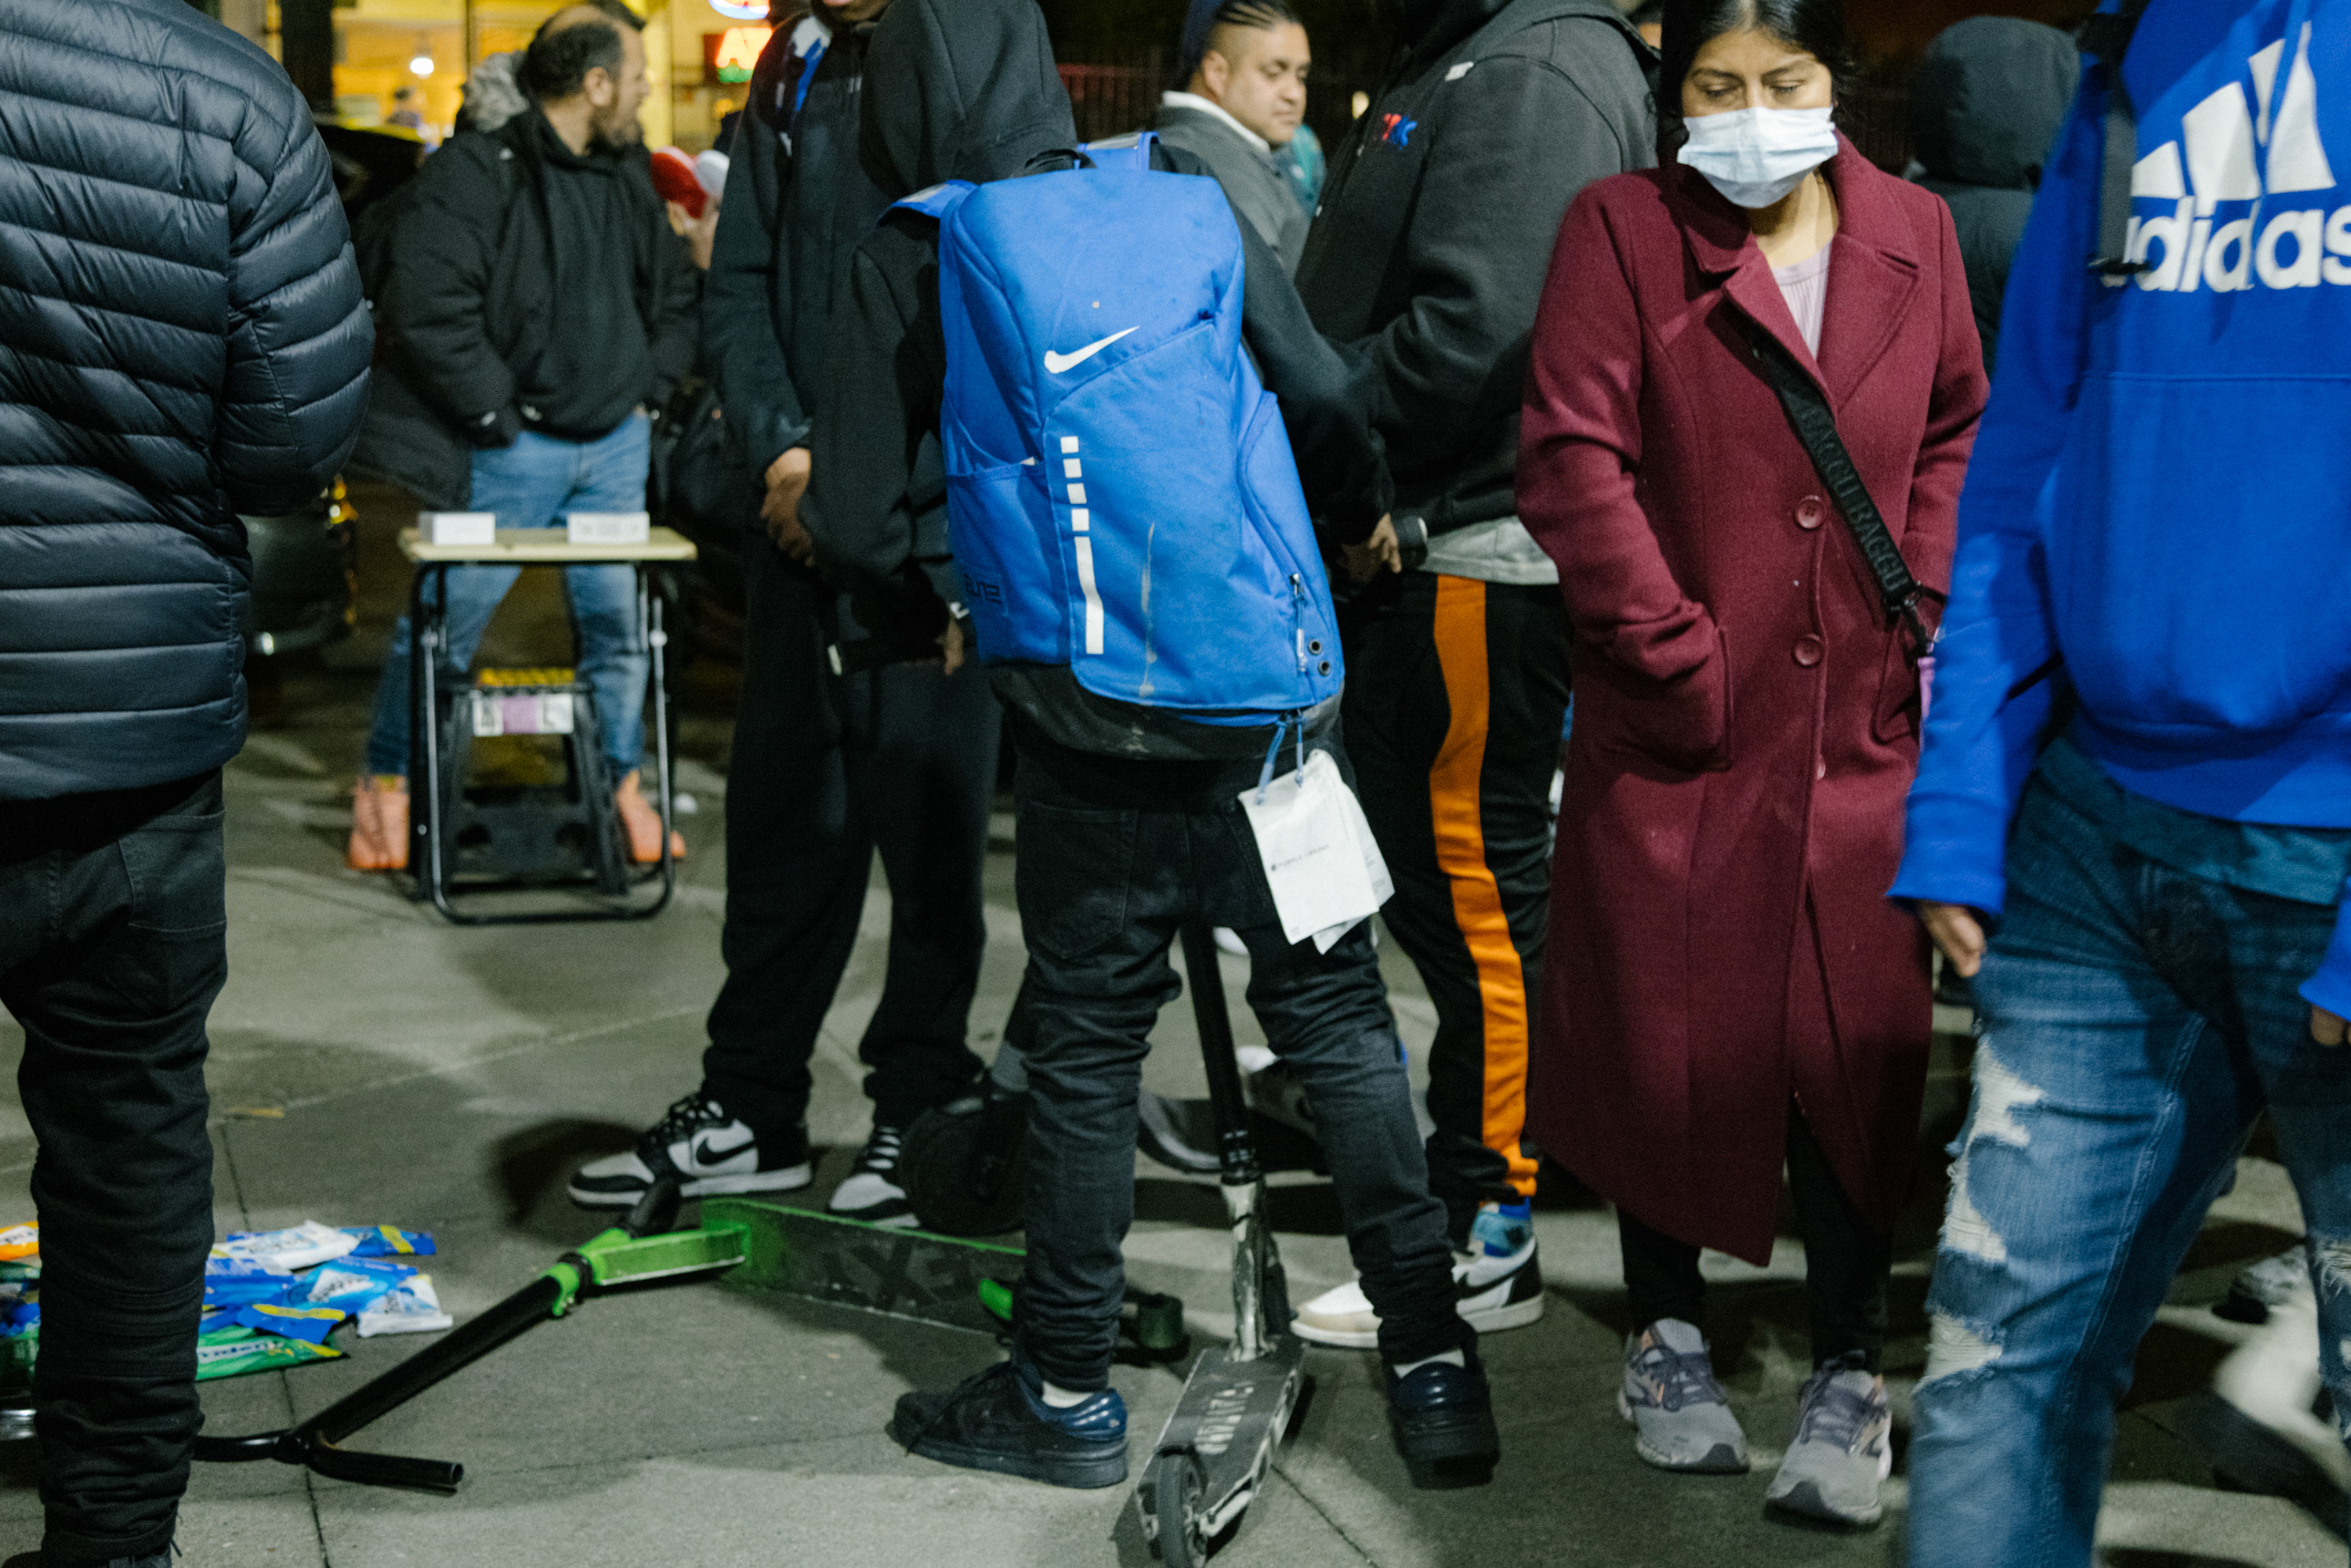 Crowded street scene at night with people walking and standing, some with backpacks and one wearing a mask.